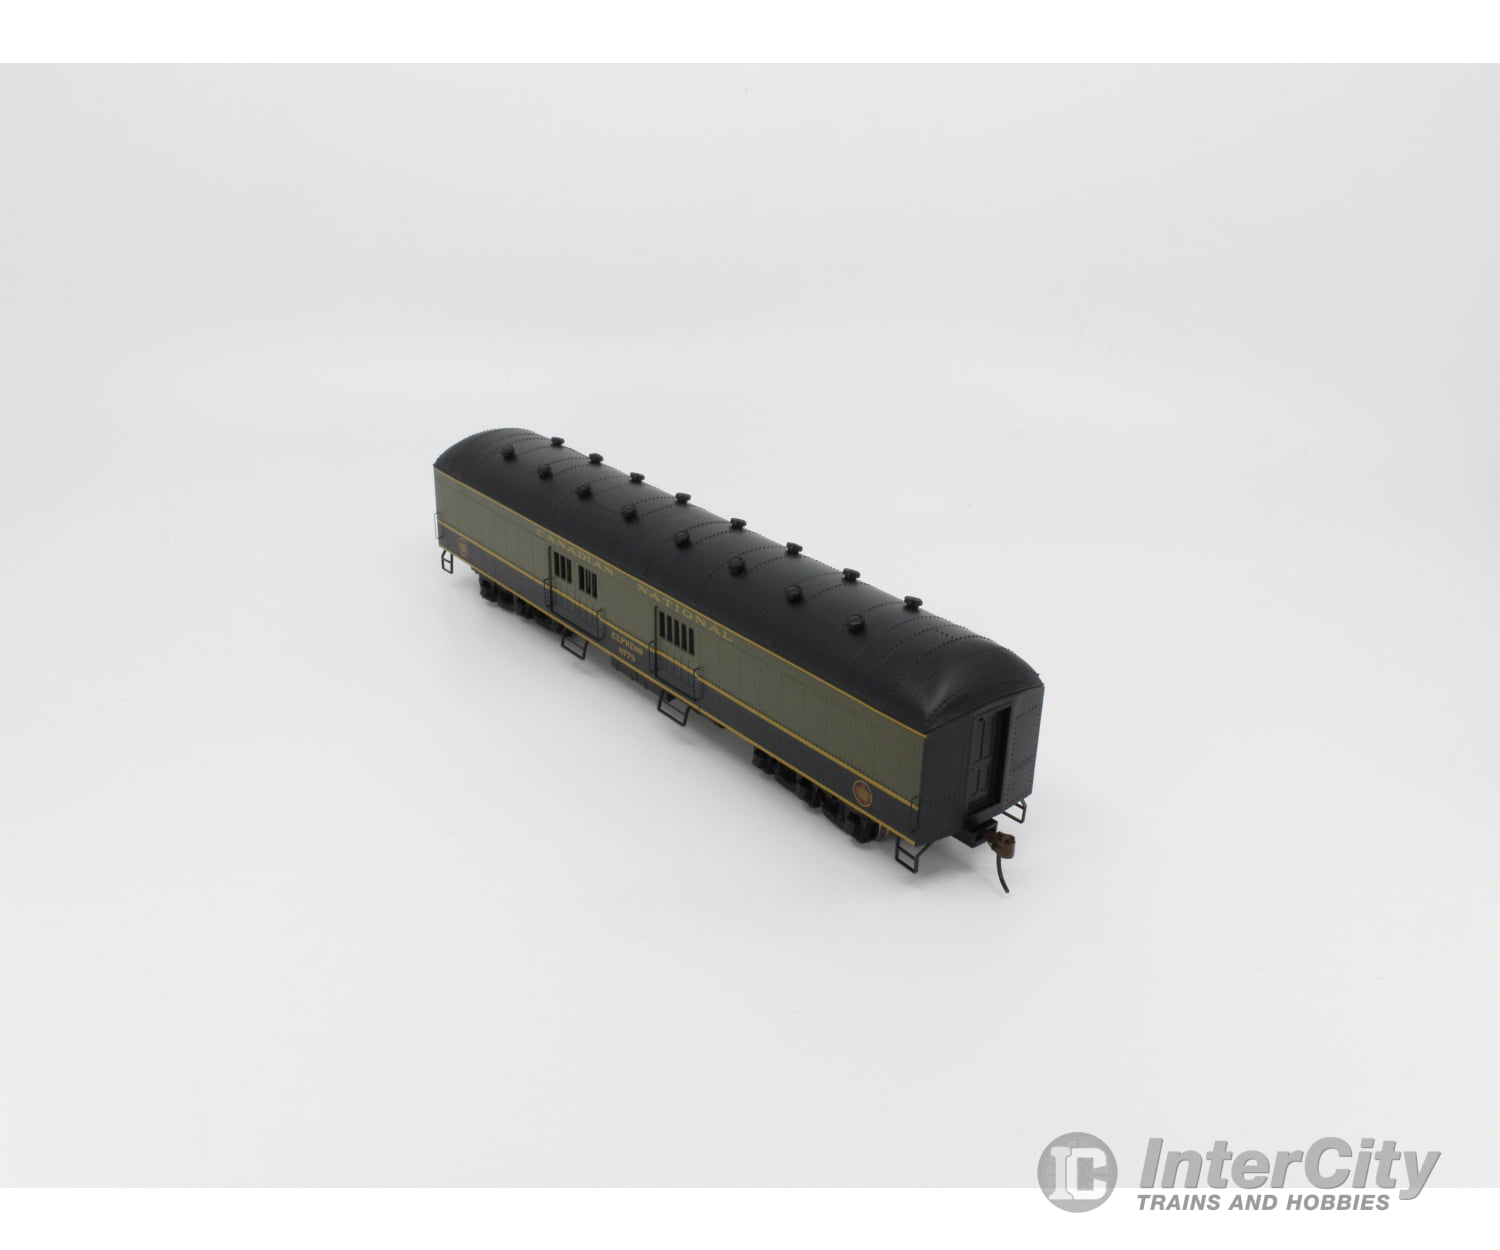 Roundhouse 86525 Ho Arch-Roof Baggage Passenger Car Canadian National (Cn) 8779 Cars